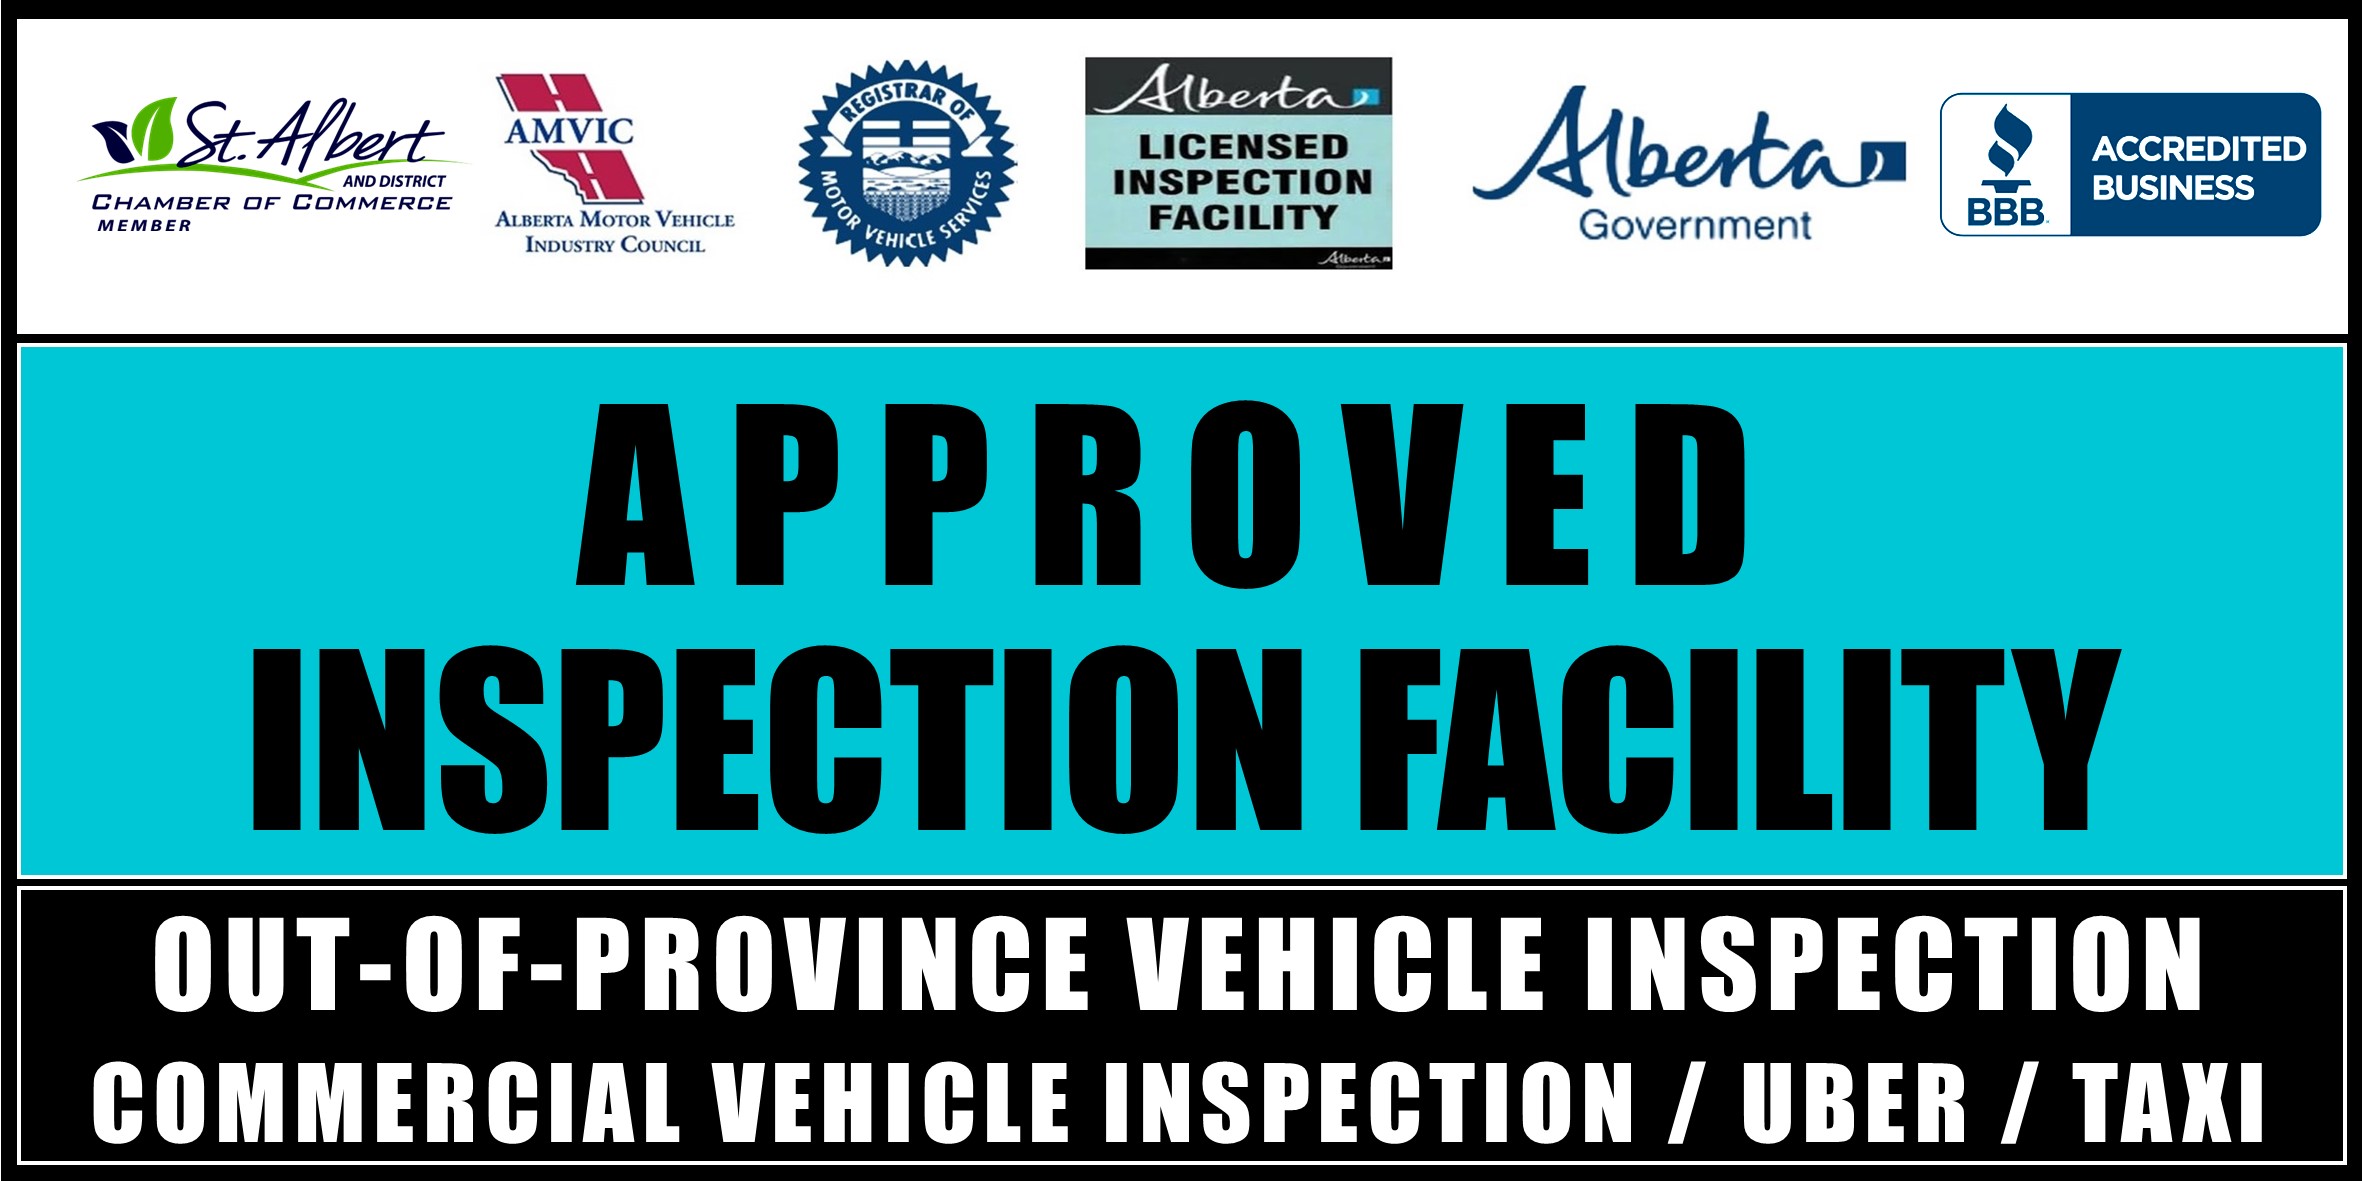 All types of vehicle inspections